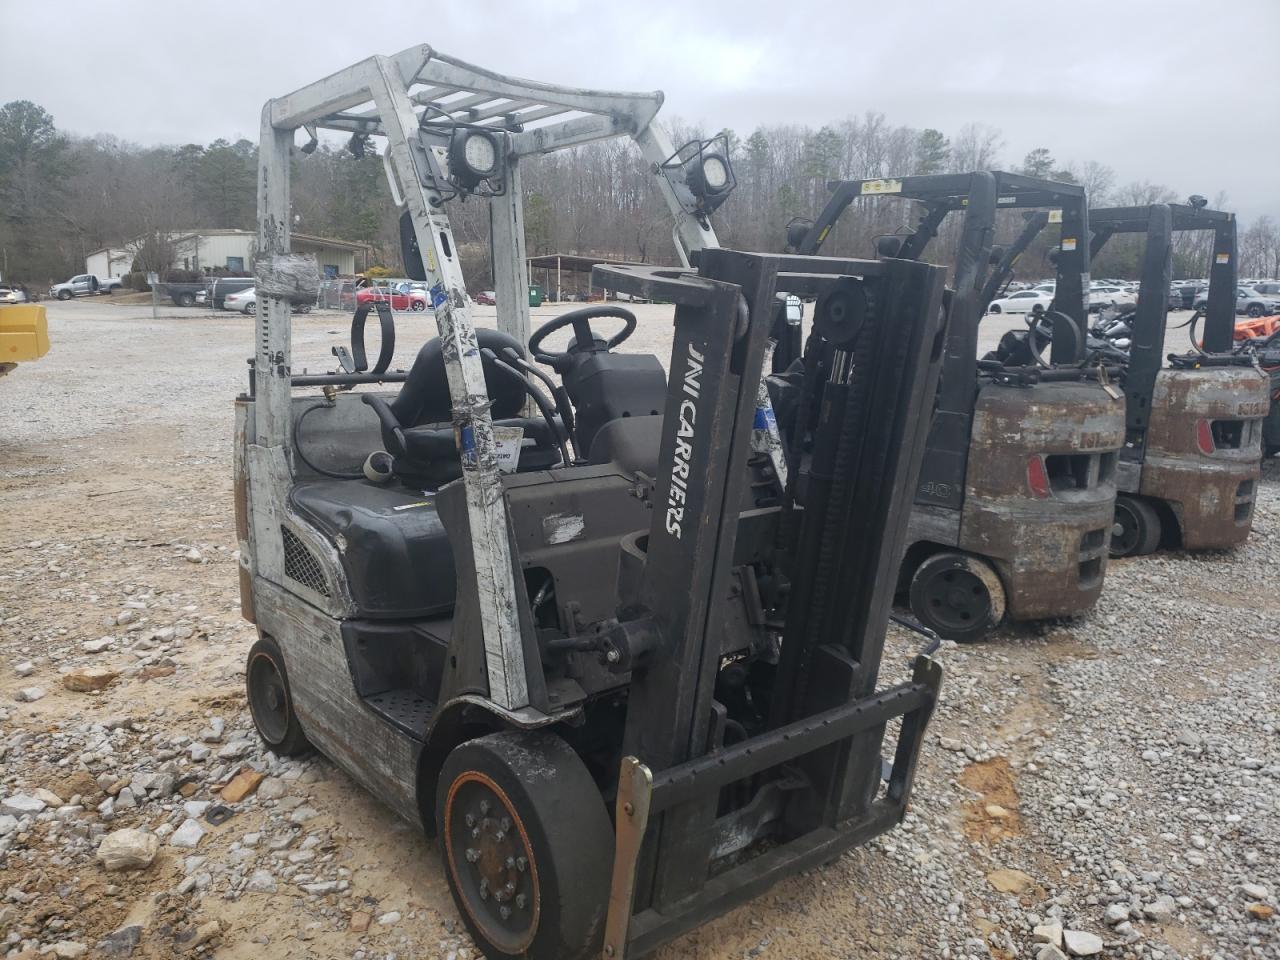 CP1F29W**** Salvage and Wrecked 2014 Nissan Forklift in AL - Hueytown